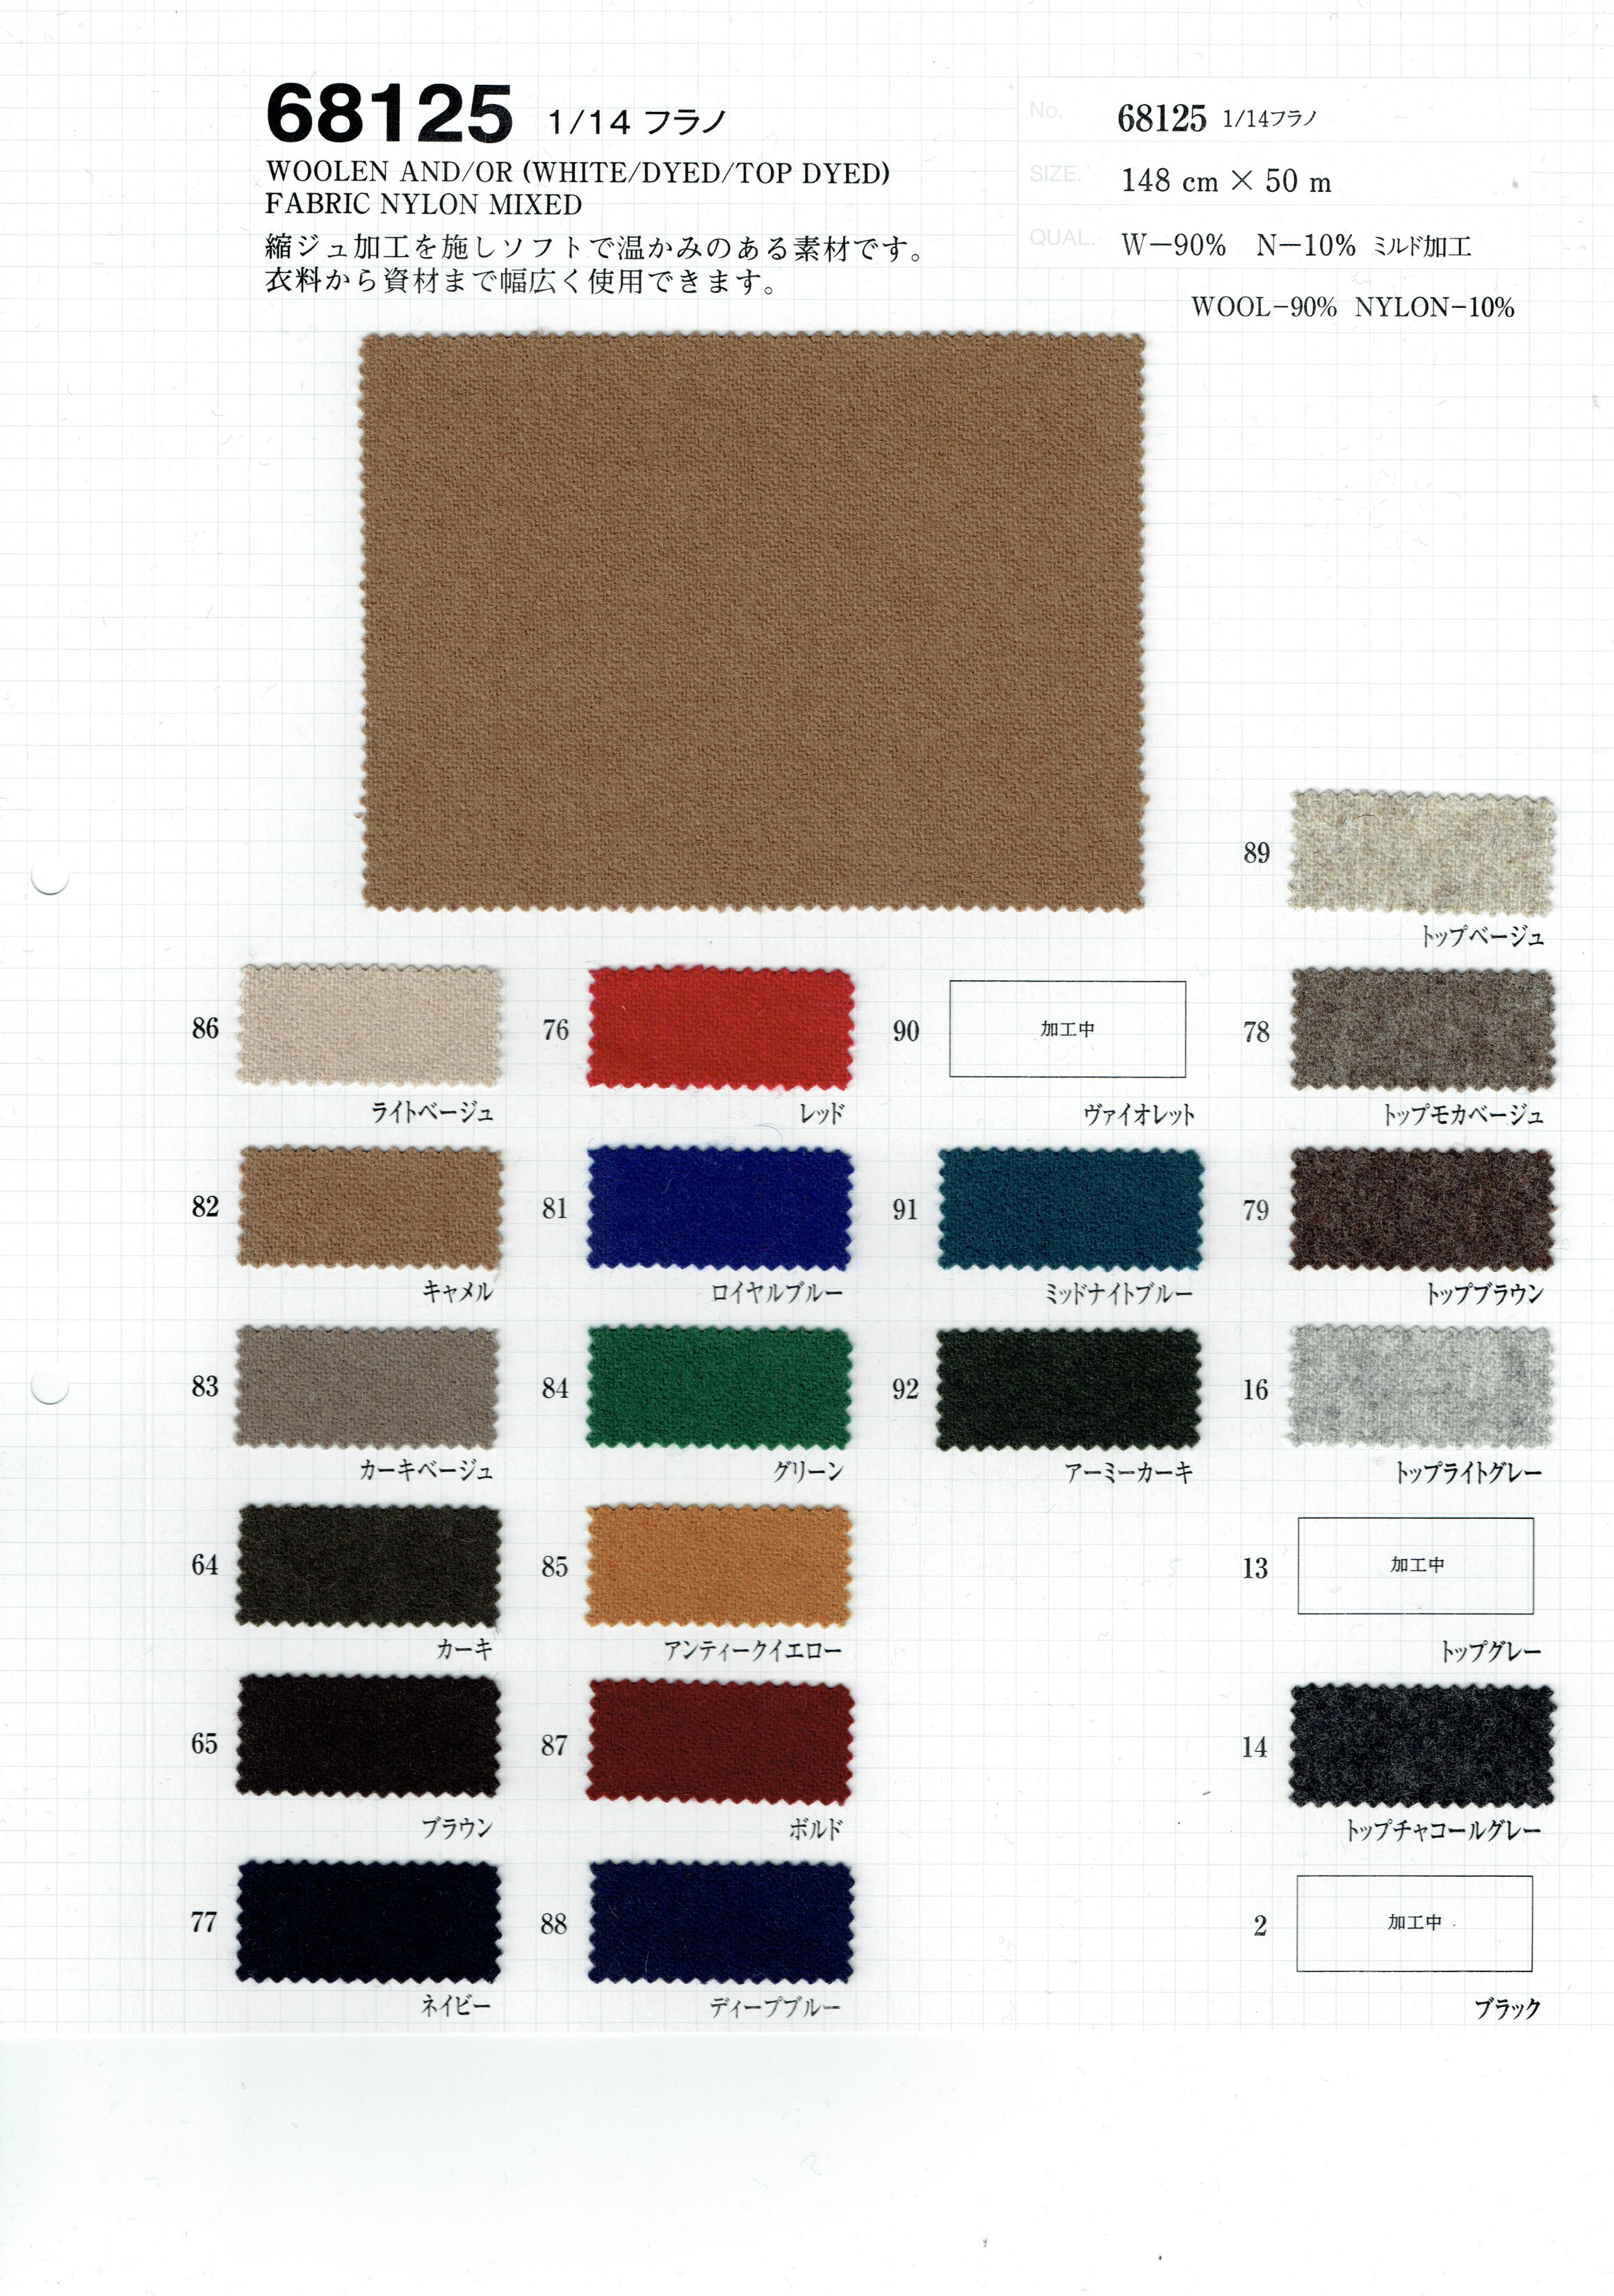 View 90% WOOLEN AND/OR[WHITE/DYED/TOP DYED]FABRIC 10% NYLON MIXED